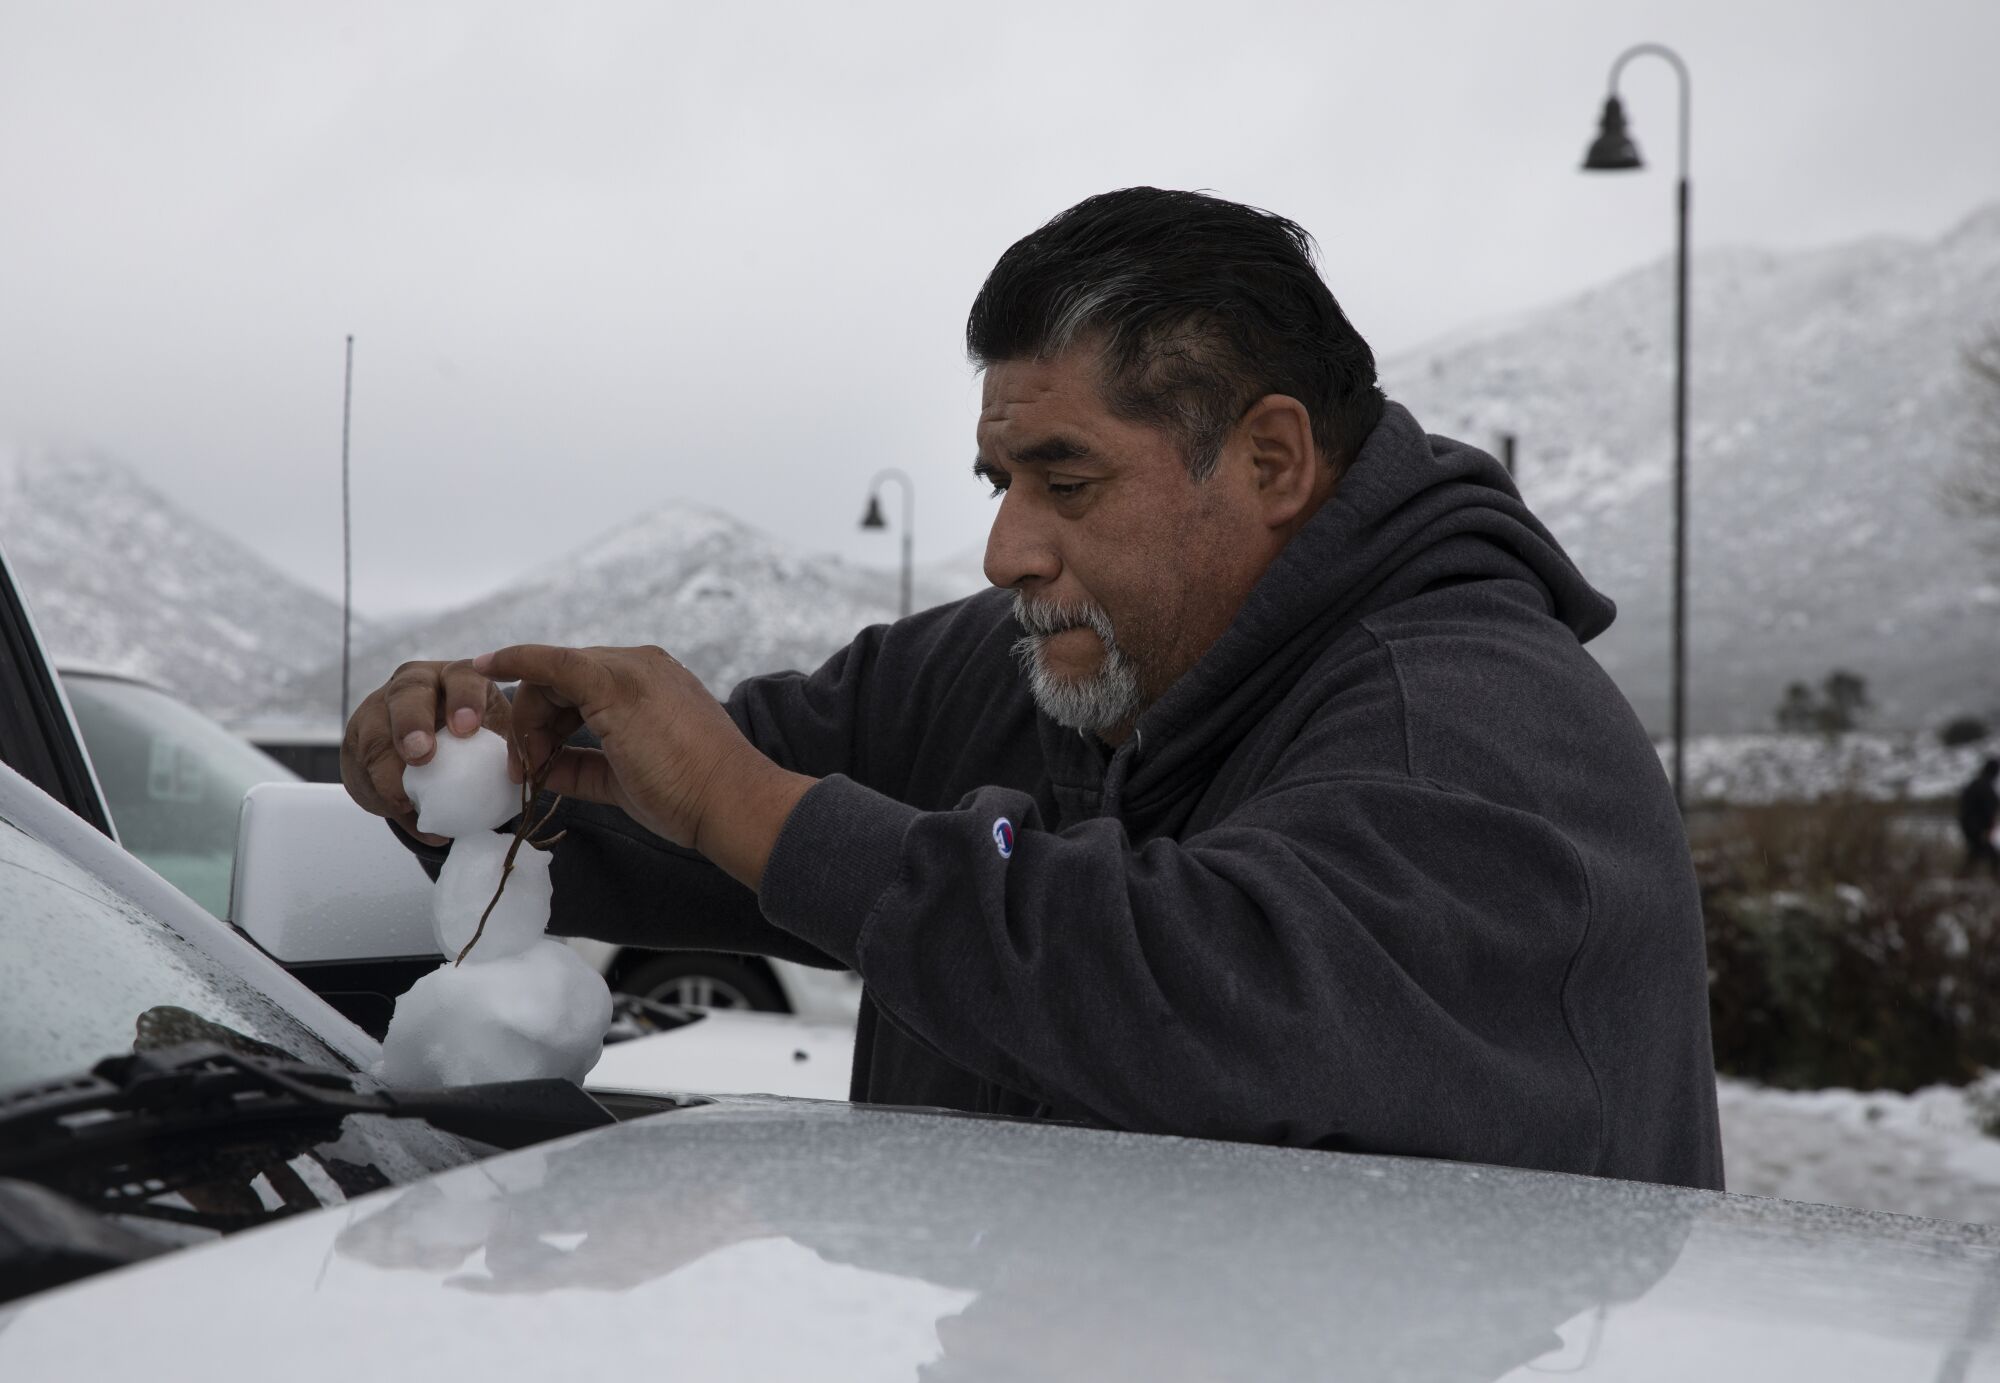 Emilio Gonzalez, 50, of San Diego, makes a snowman on top of a vehicle at a rest stop off of Interstate 8 near Pine Valley.